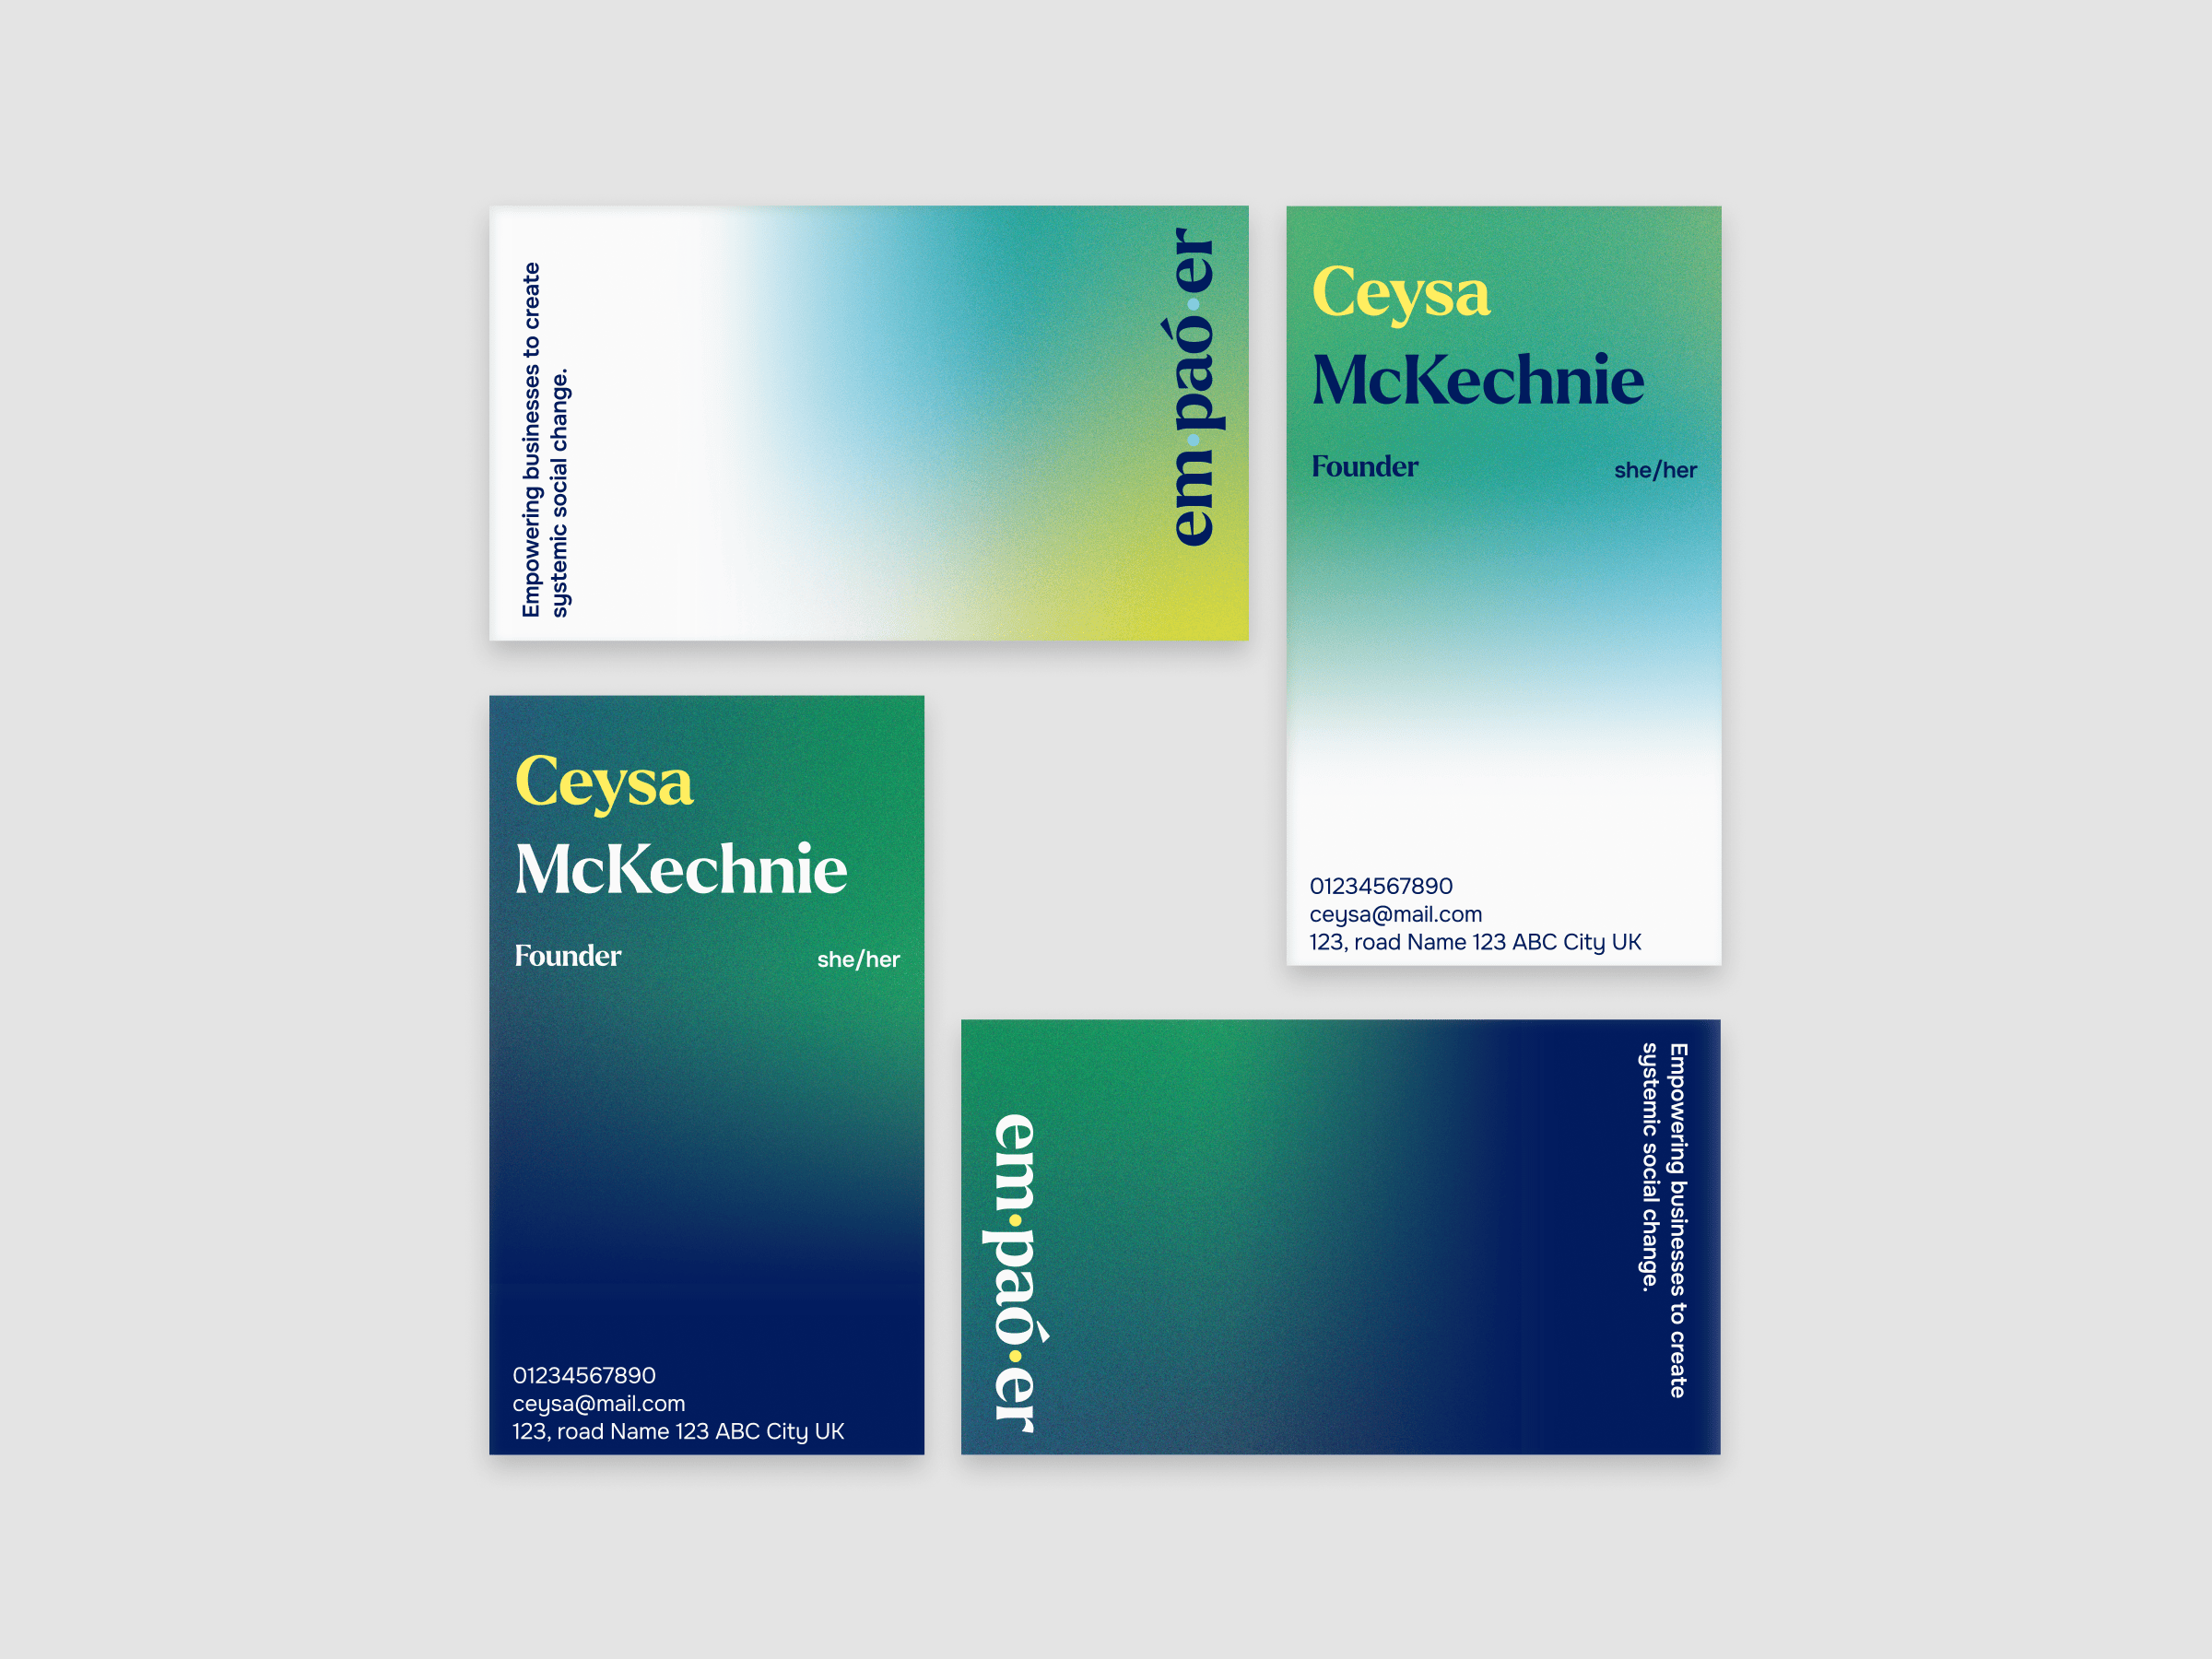 business cards, featuring founders name and typgraphical elements on branded colour background with gradients